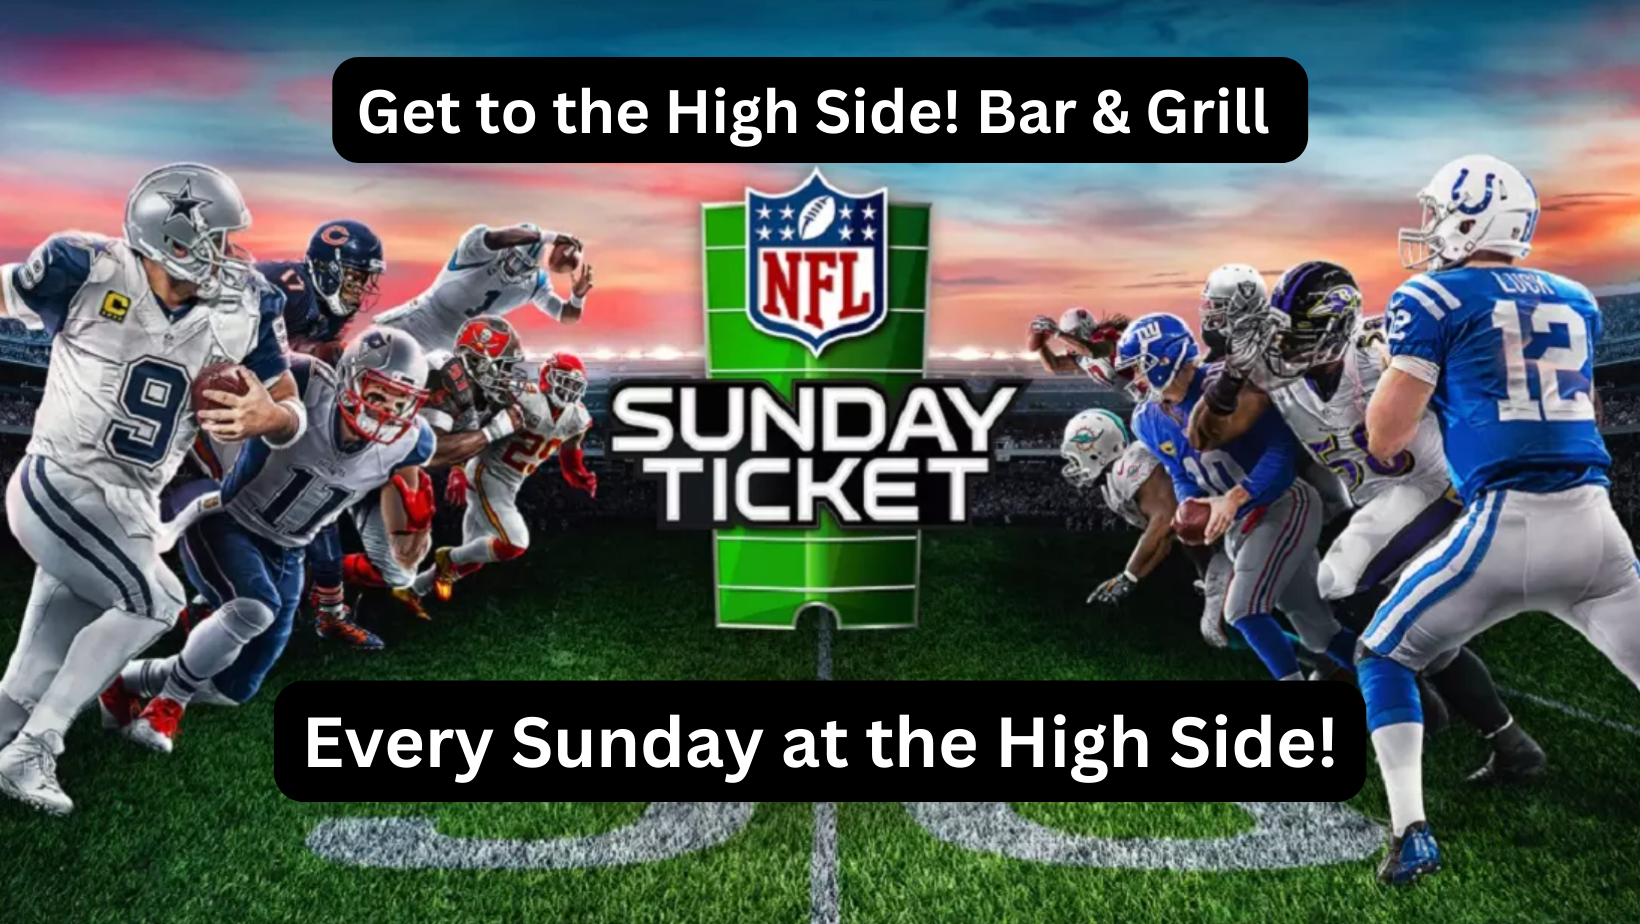 Get to the High Side! Bar and Grill for NFL Sundays!